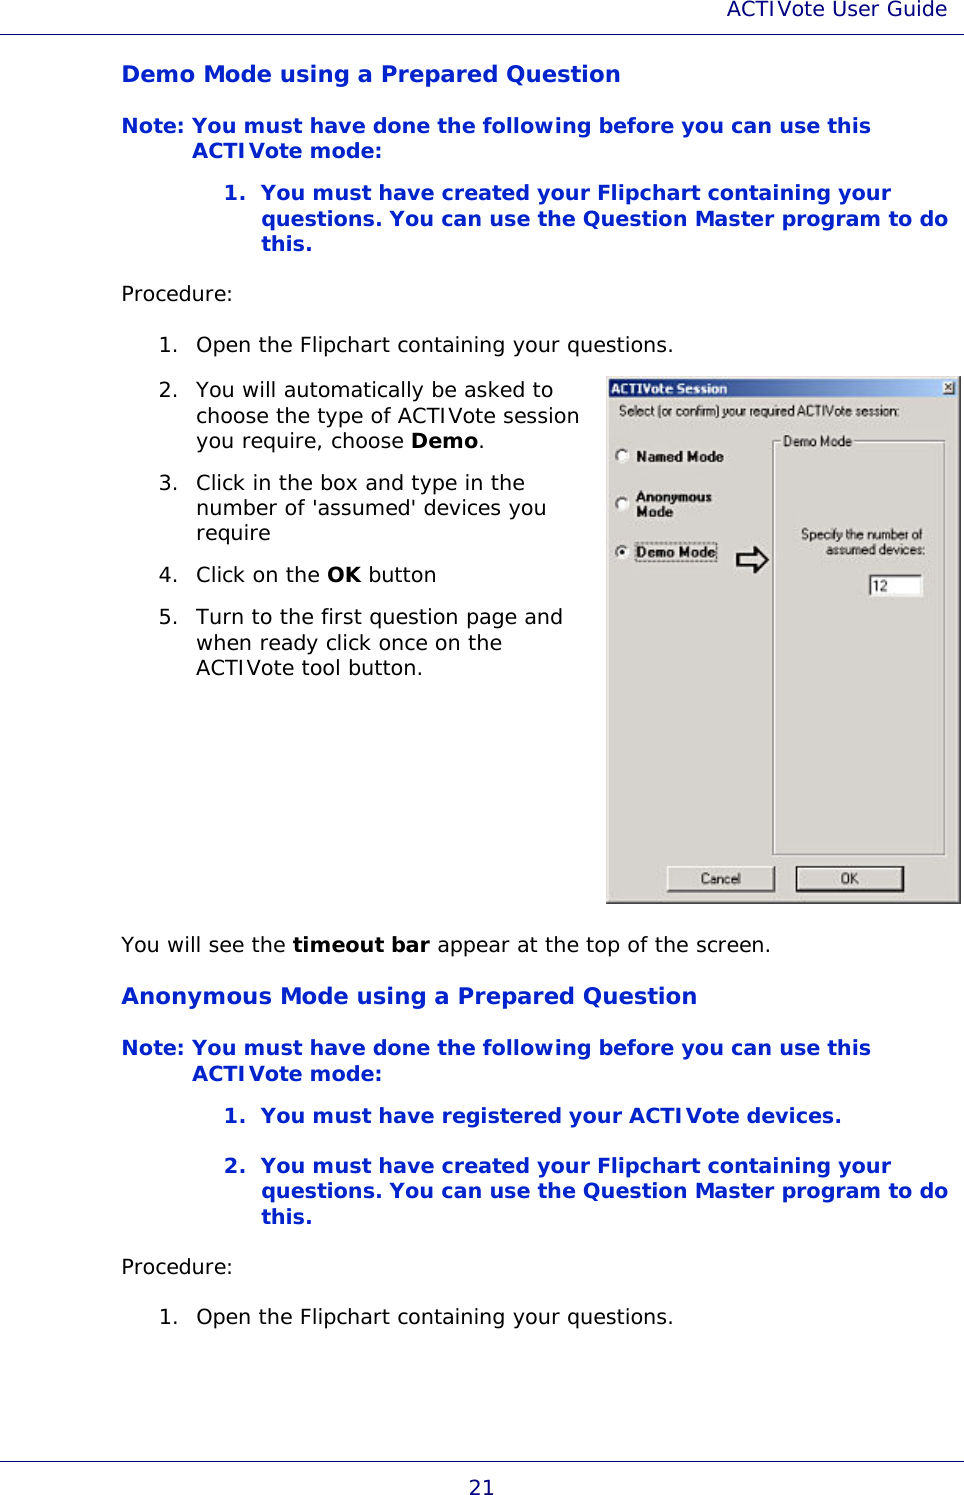 ACTIVote User Guide 21 Demo Mode using a Prepared Question Note: You must have done the following before you can use this ACTIVote mode: 1. You must have created your Flipchart containing your questions. You can use the Question Master program to do this. Procedure: 1. Open the Flipchart containing your questions. 2. You will automatically be asked to choose the type of ACTIVote session you require, choose Demo.  3. Click in the box and type in the number of &apos;assumed&apos; devices you require 4. Click on the OK button 5. Turn to the first question page and when ready click once on the ACTIVote tool button.  You will see the timeout bar appear at the top of the screen. Anonymous Mode using a Prepared Question Note: You must have done the following before you can use this ACTIVote mode: 1. You must have registered your ACTIVote devices. 2. You must have created your Flipchart containing your questions. You can use the Question Master program to do this. Procedure: 1. Open the Flipchart containing your questions. 